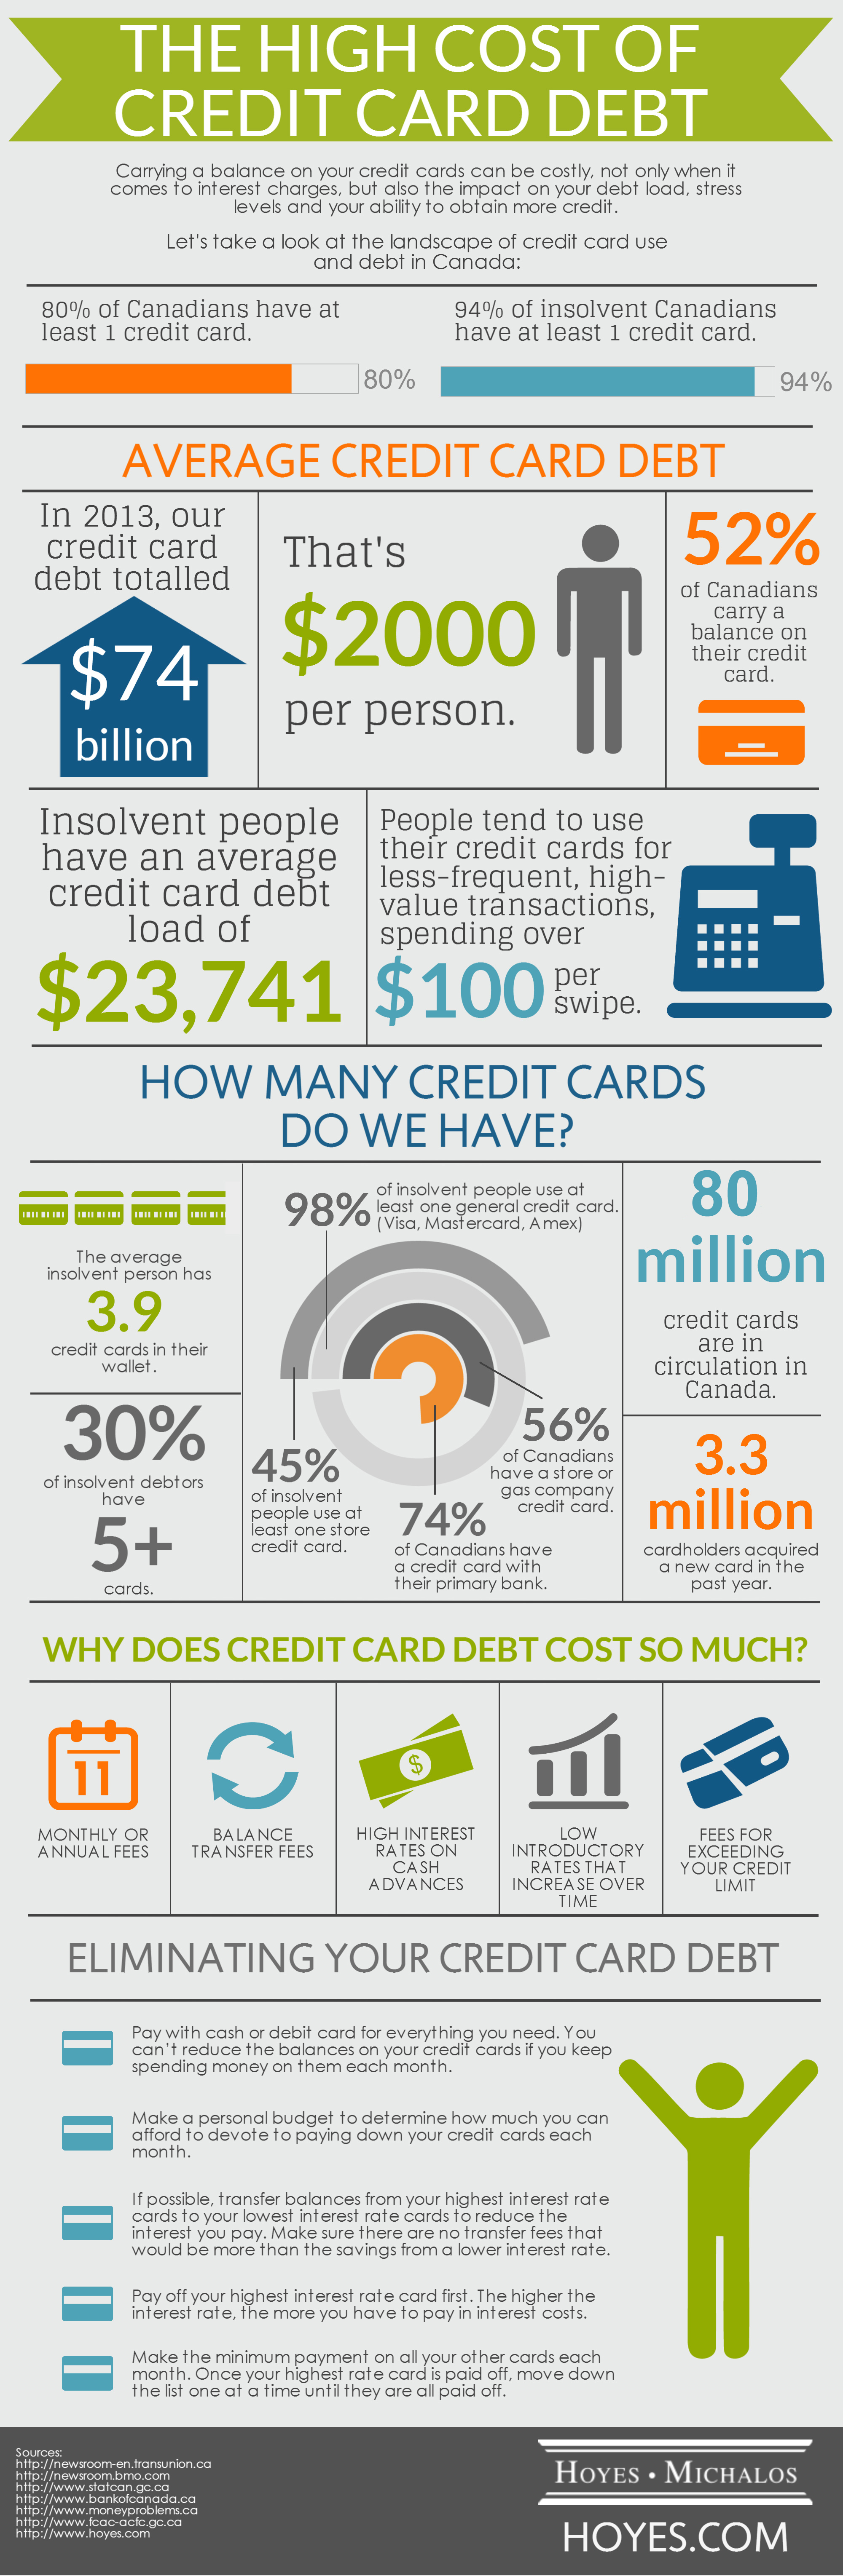 high-cost-of-credit-card-debt